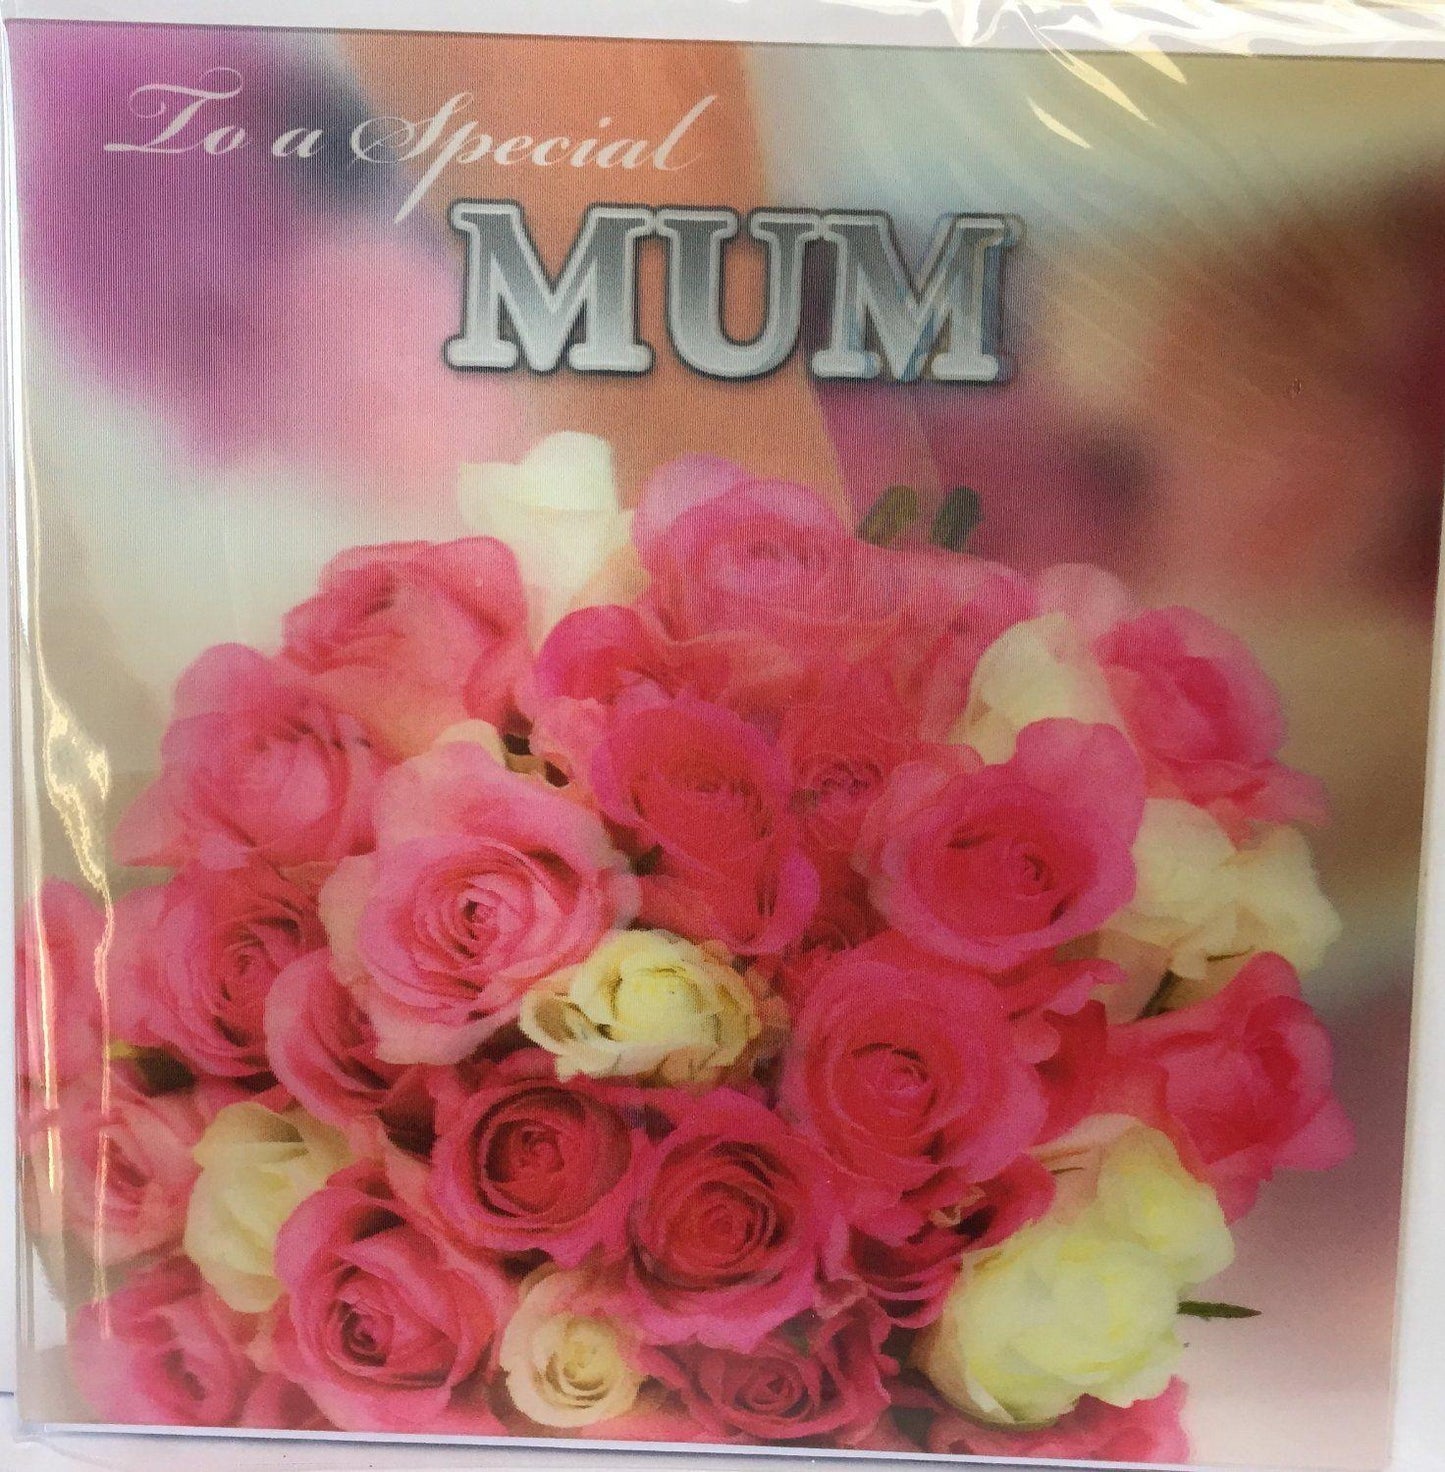 3D Holographic Beautiful Colorful Bouquet of Roses To a Special Mum Mother's Day Card